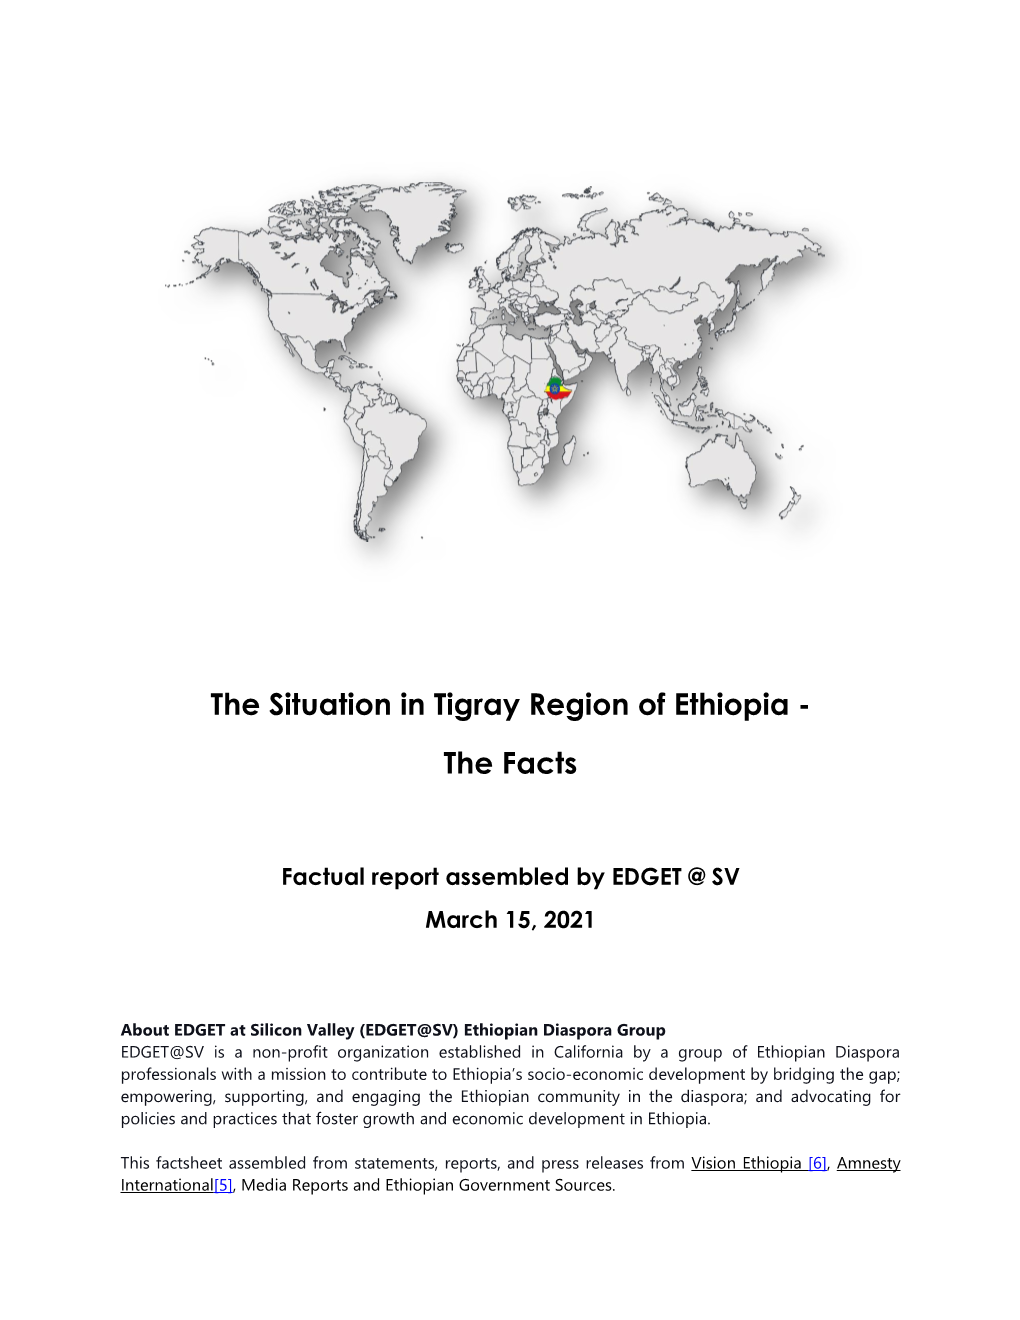 The Situation in Tigray Region of Ethiopia - the Facts